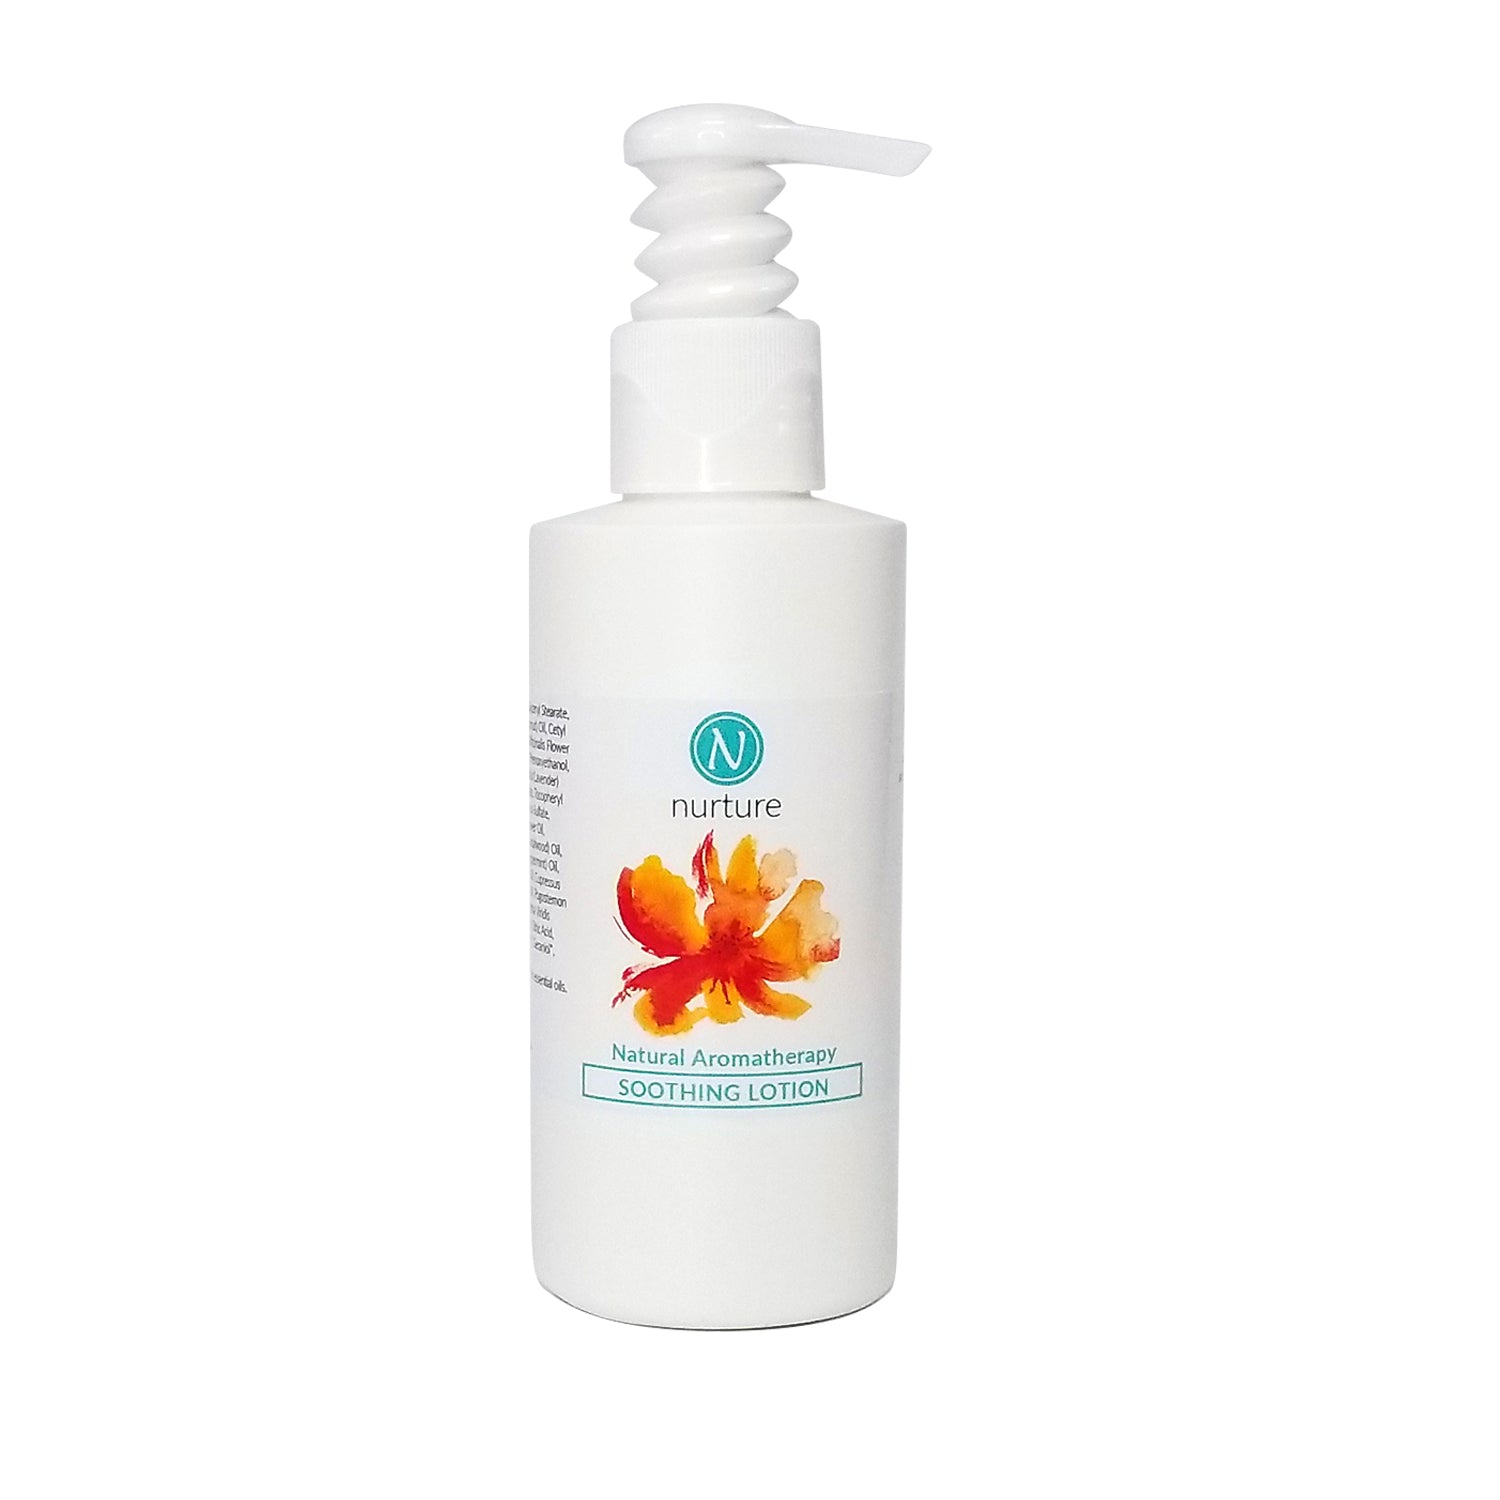 Nurture Soothing Body Lotion